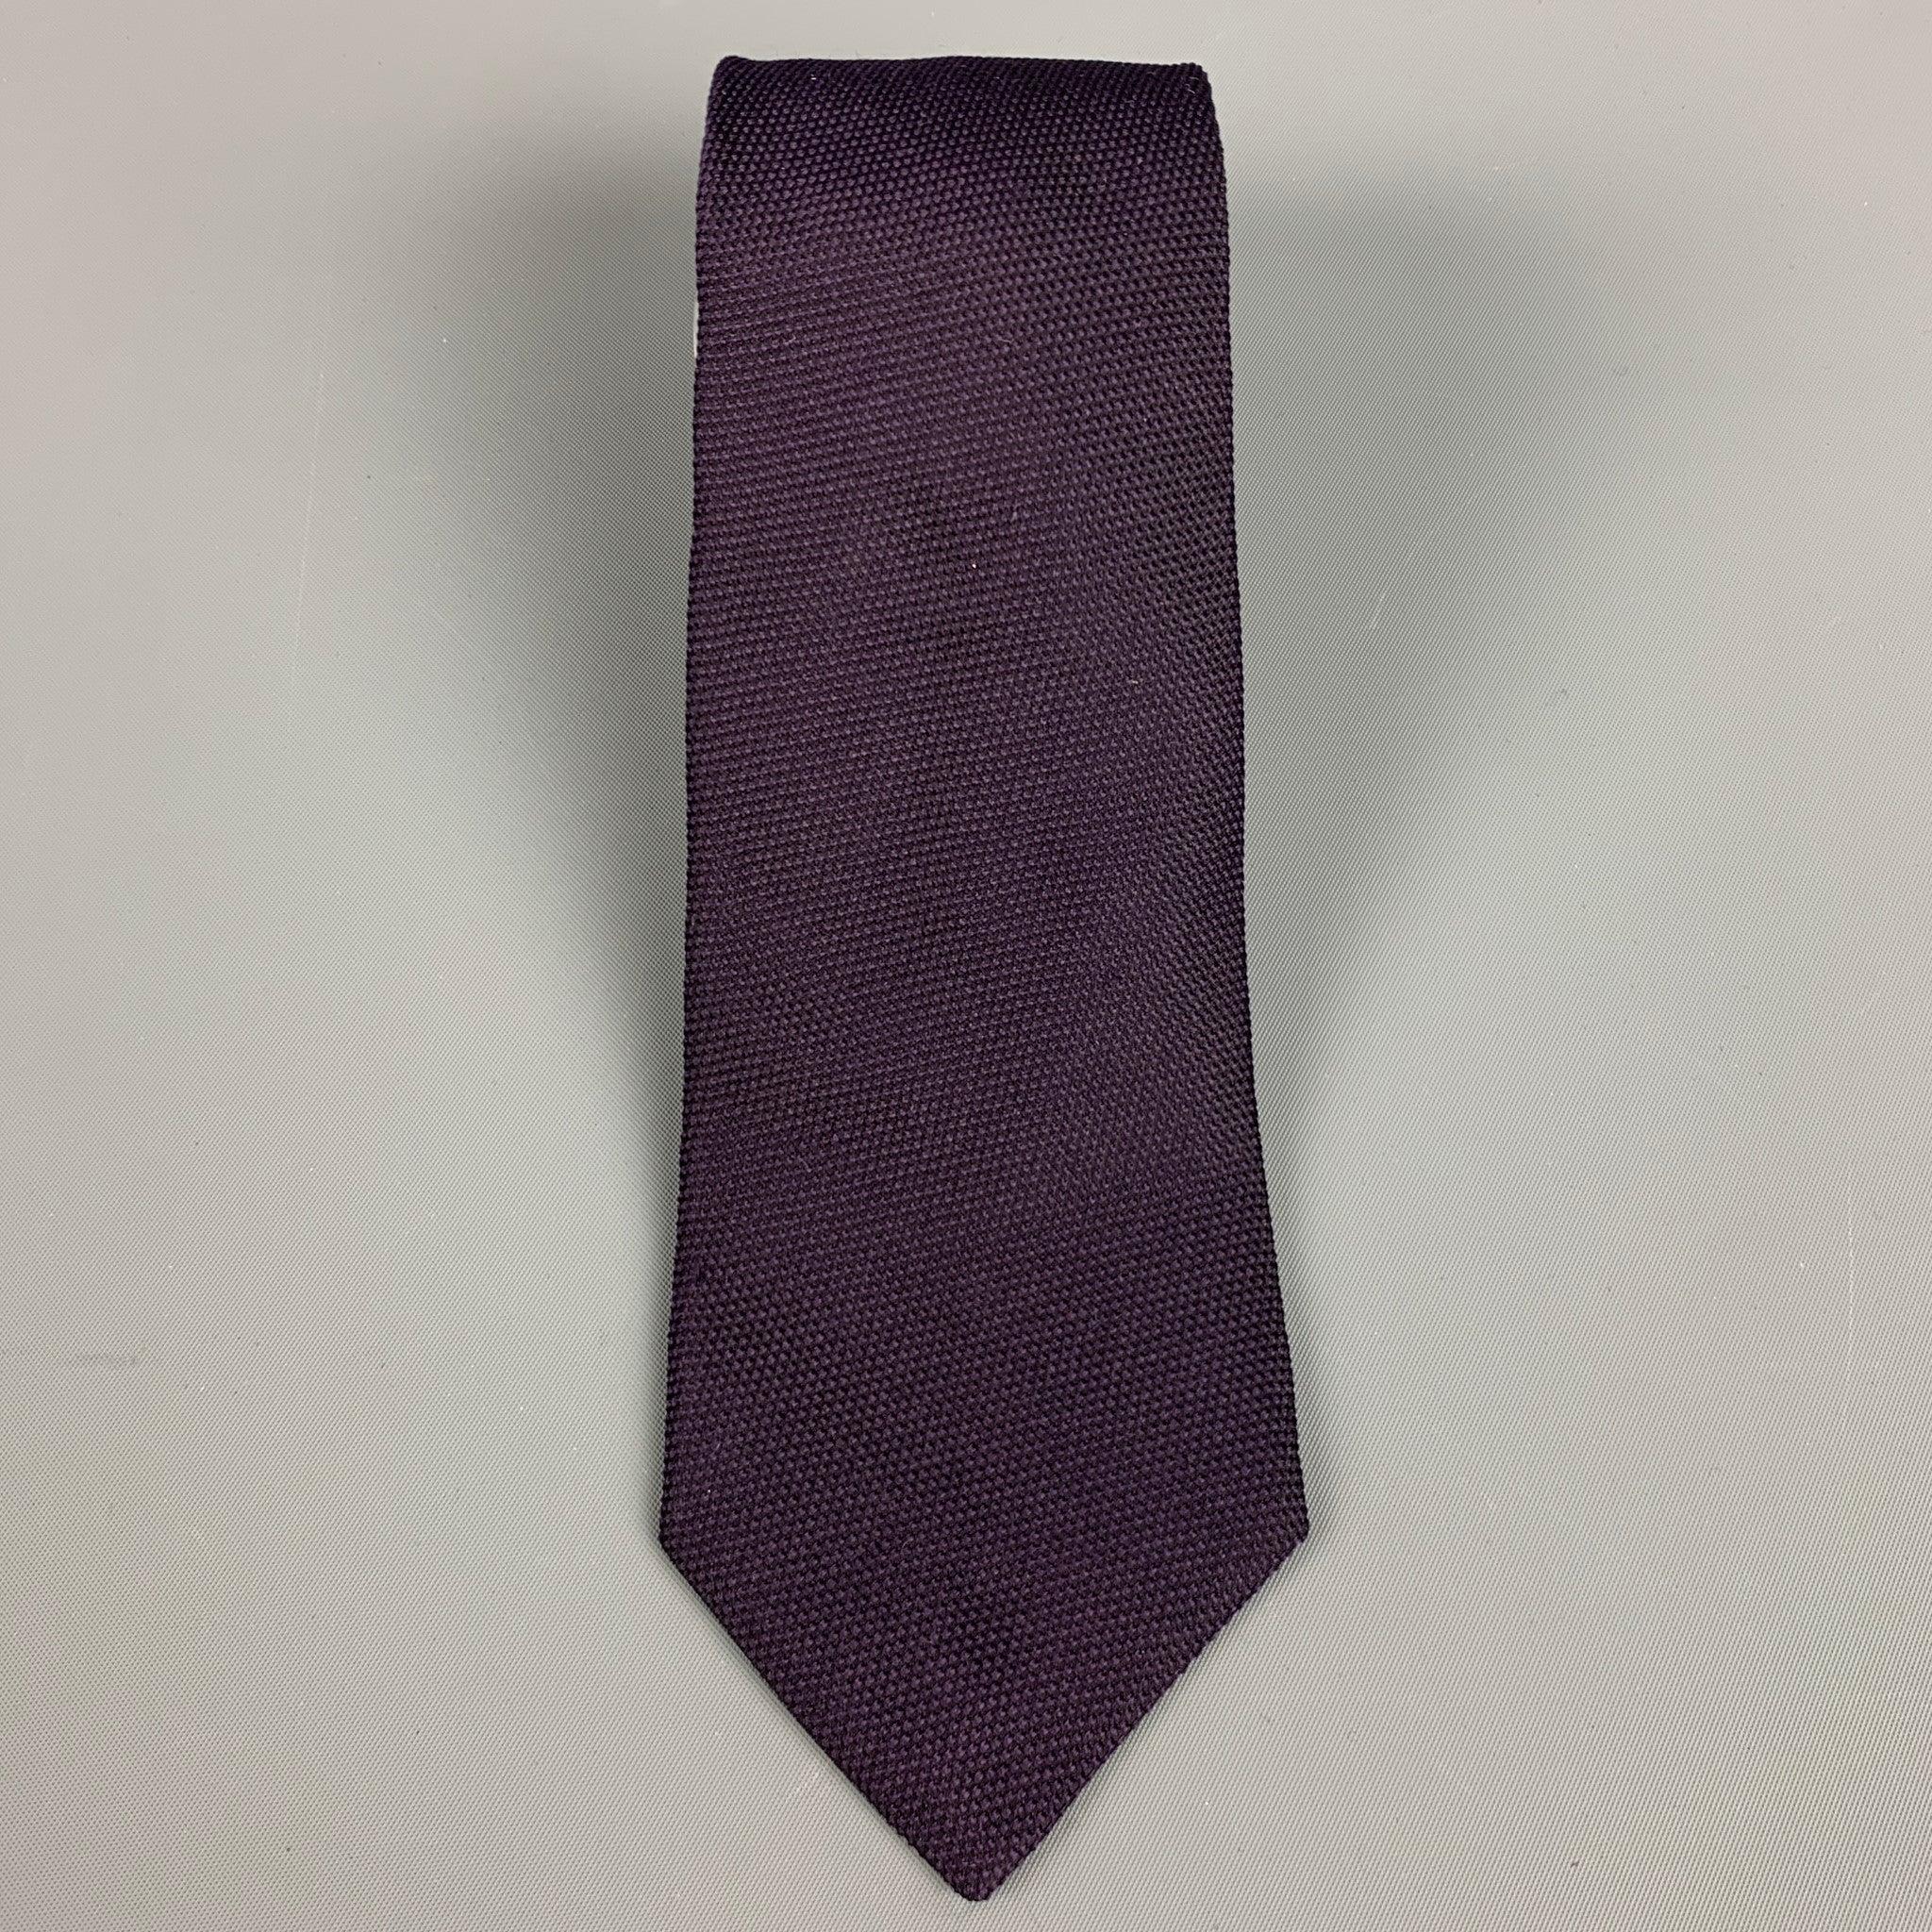 GIORGIO ARMANI
necktie in a purple and black silk fabric featuring a textured appearance. Made in Italy.Excellent Pre-Owned Condition. 

Measurements: 
  Width: 3 inches Length: 58 inches 
  
  
 
Reference: 127988
Category: Tie
More Details
   